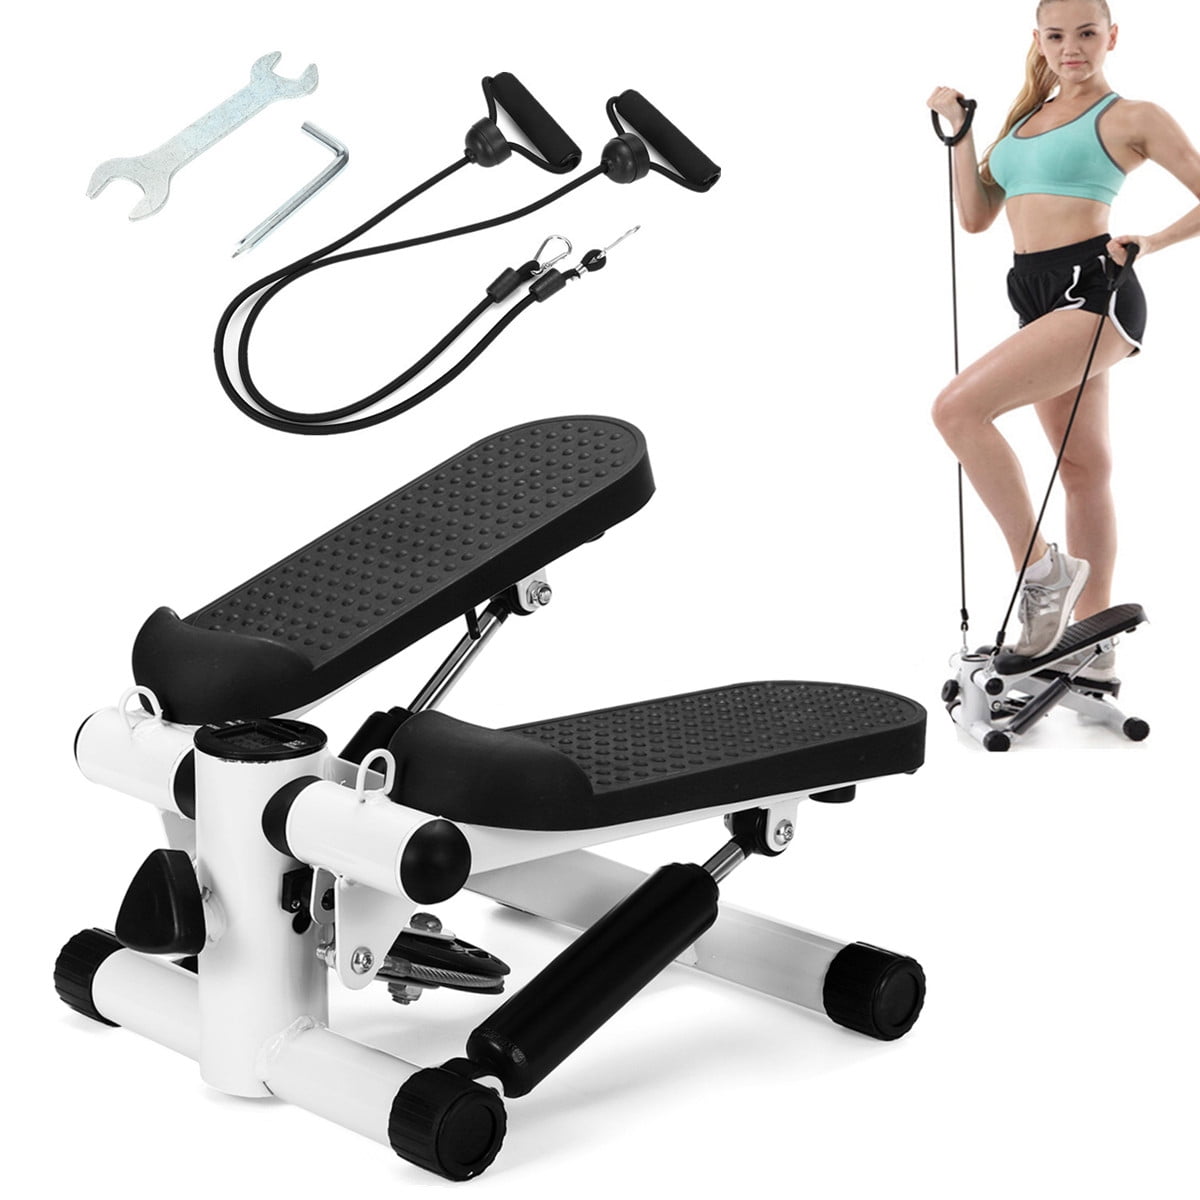 Mini Stepper Exercise Machine Fitness Home Gym Resistance Band Cardio UK Stock